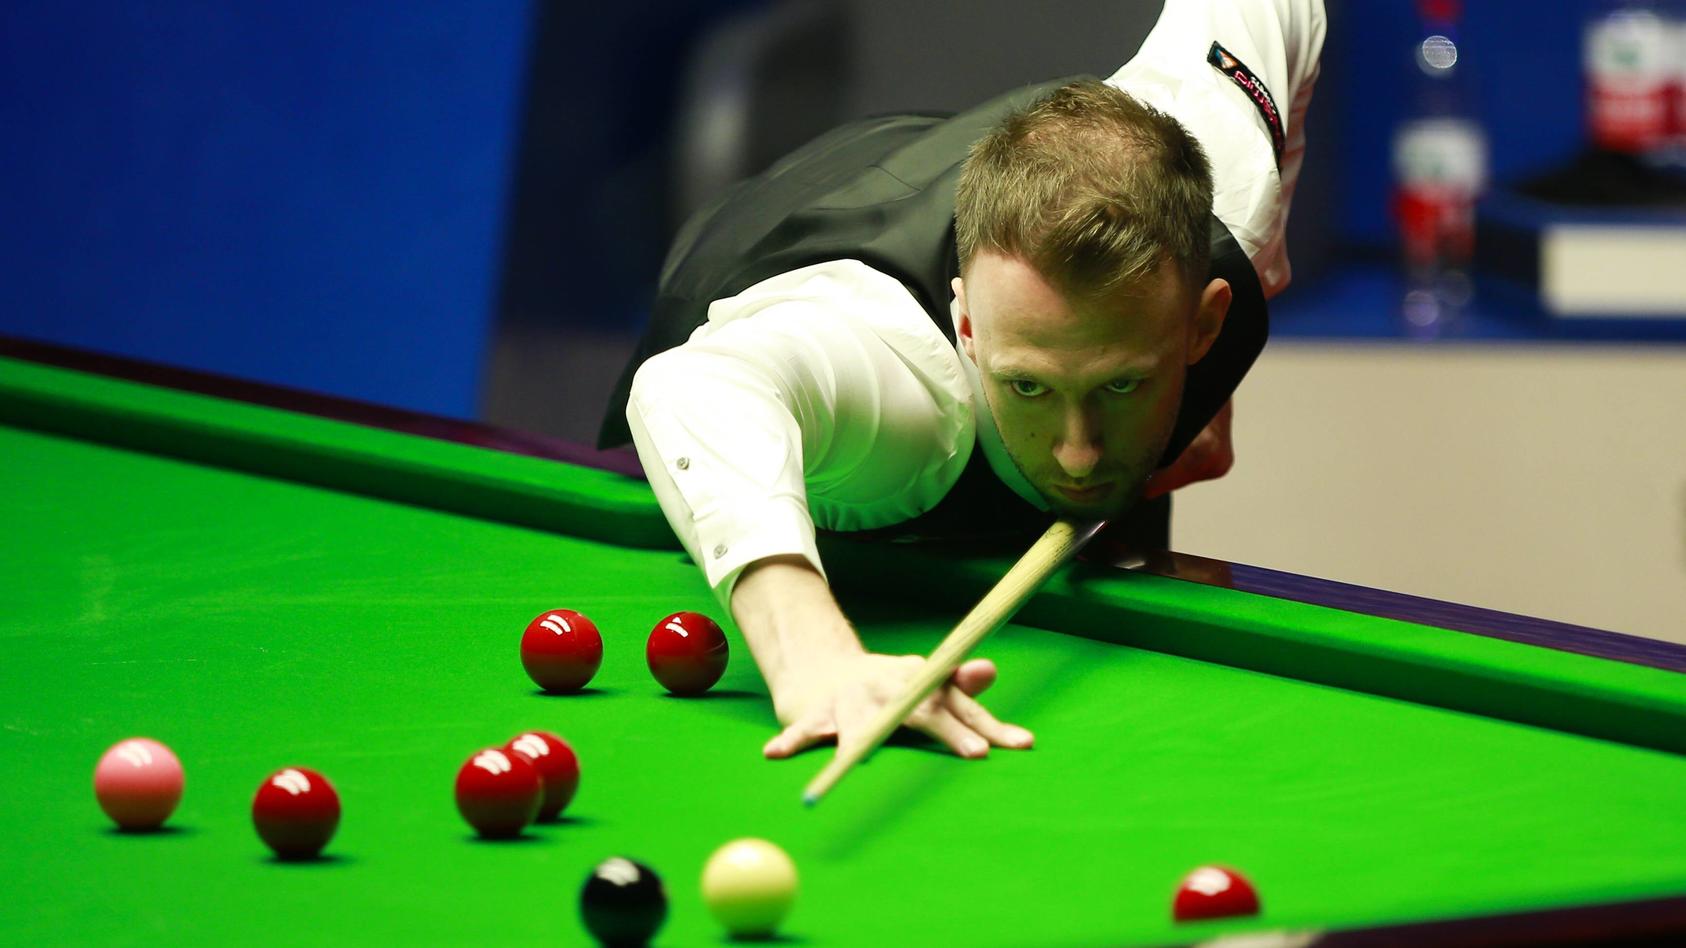 SHEFFIELD, ENGLAND - MAY 05: Judd Trump of England plays a shot in the final match against John Higgins of Scotland on day 16 of the 2019 Betfred World Snooker Championship at Crucible Theatre on May 5, 2019 in Sheffield, England. PUBLICATIONxINxGERx